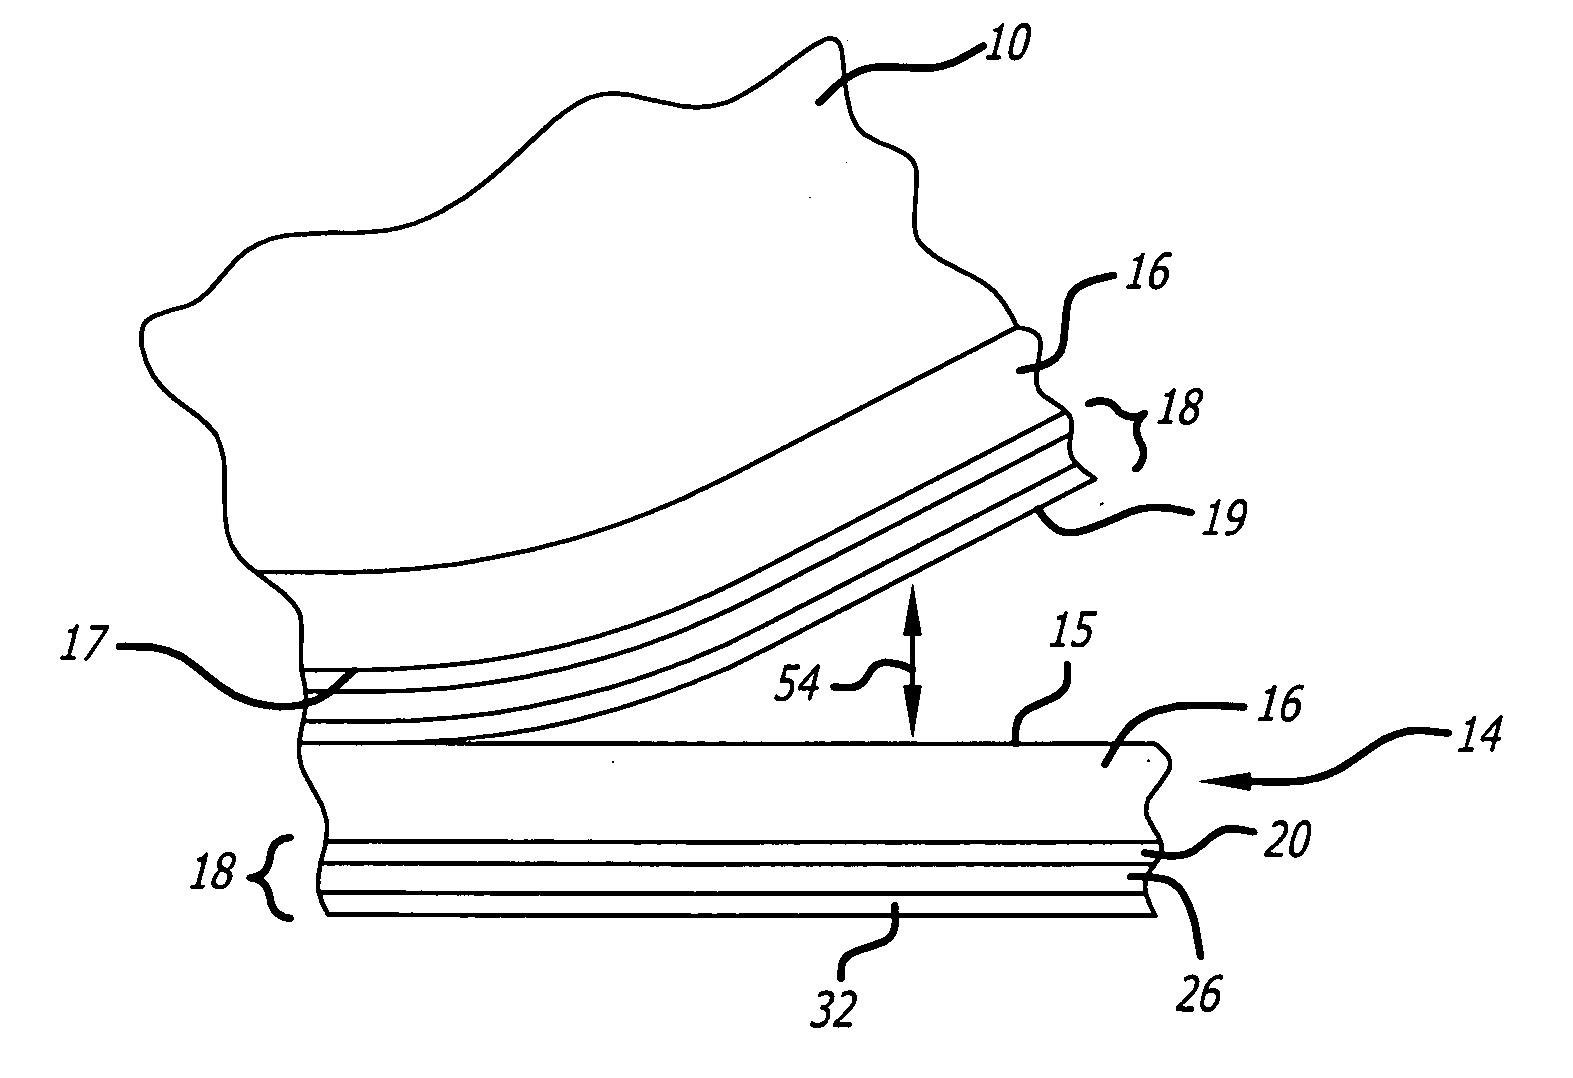 Composite Tape For Use In Tape Laying Machines